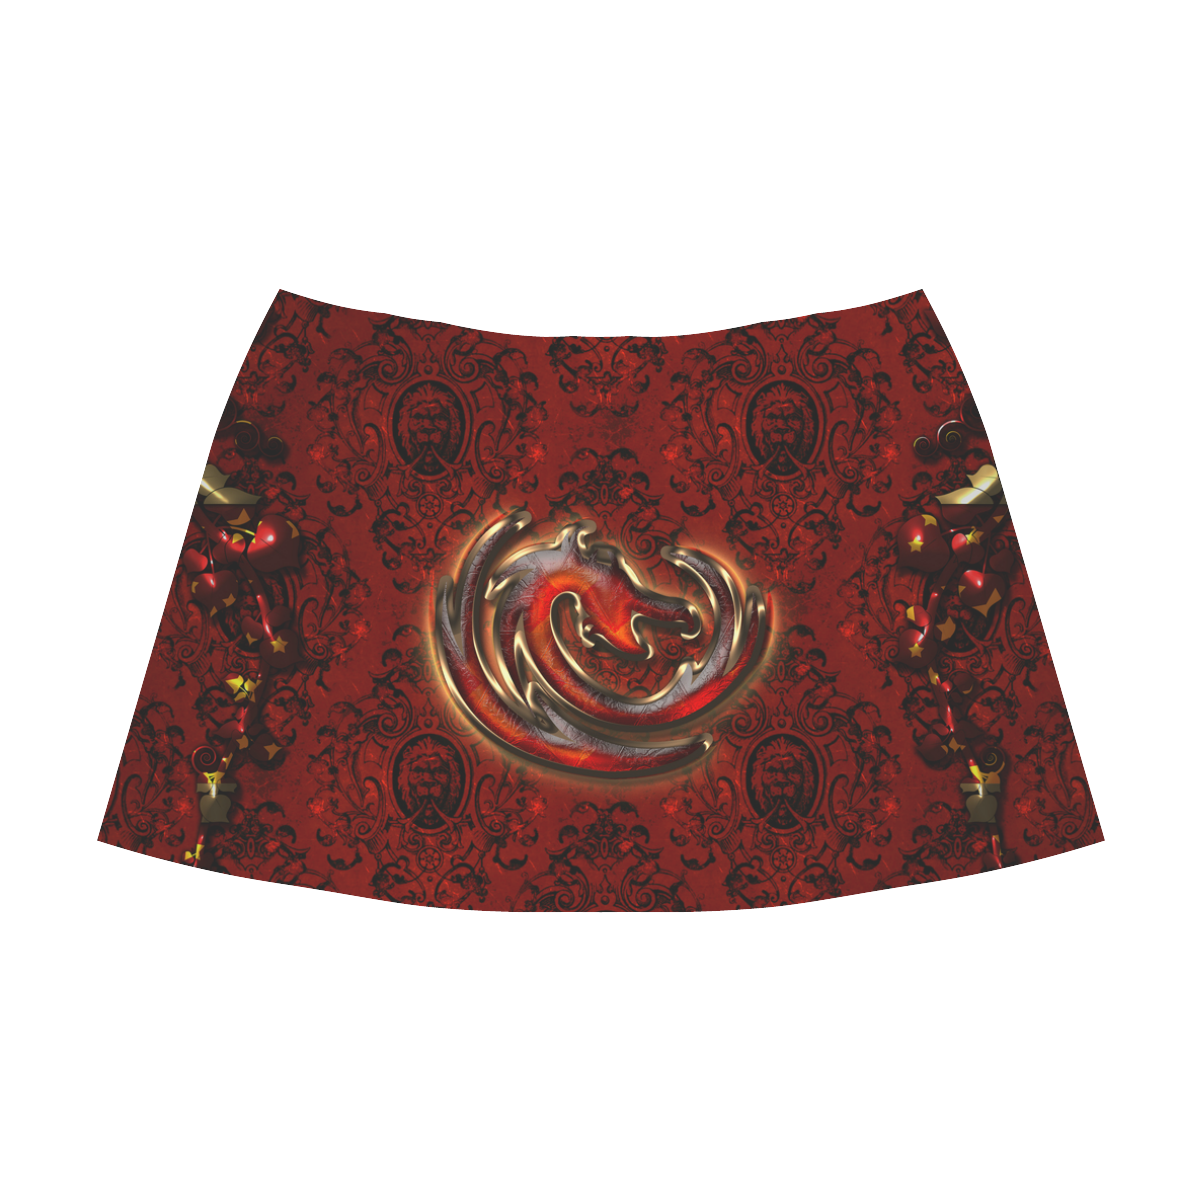 The dragon in red and gold Mnemosyne Women's Crepe Skirt (Model D16)